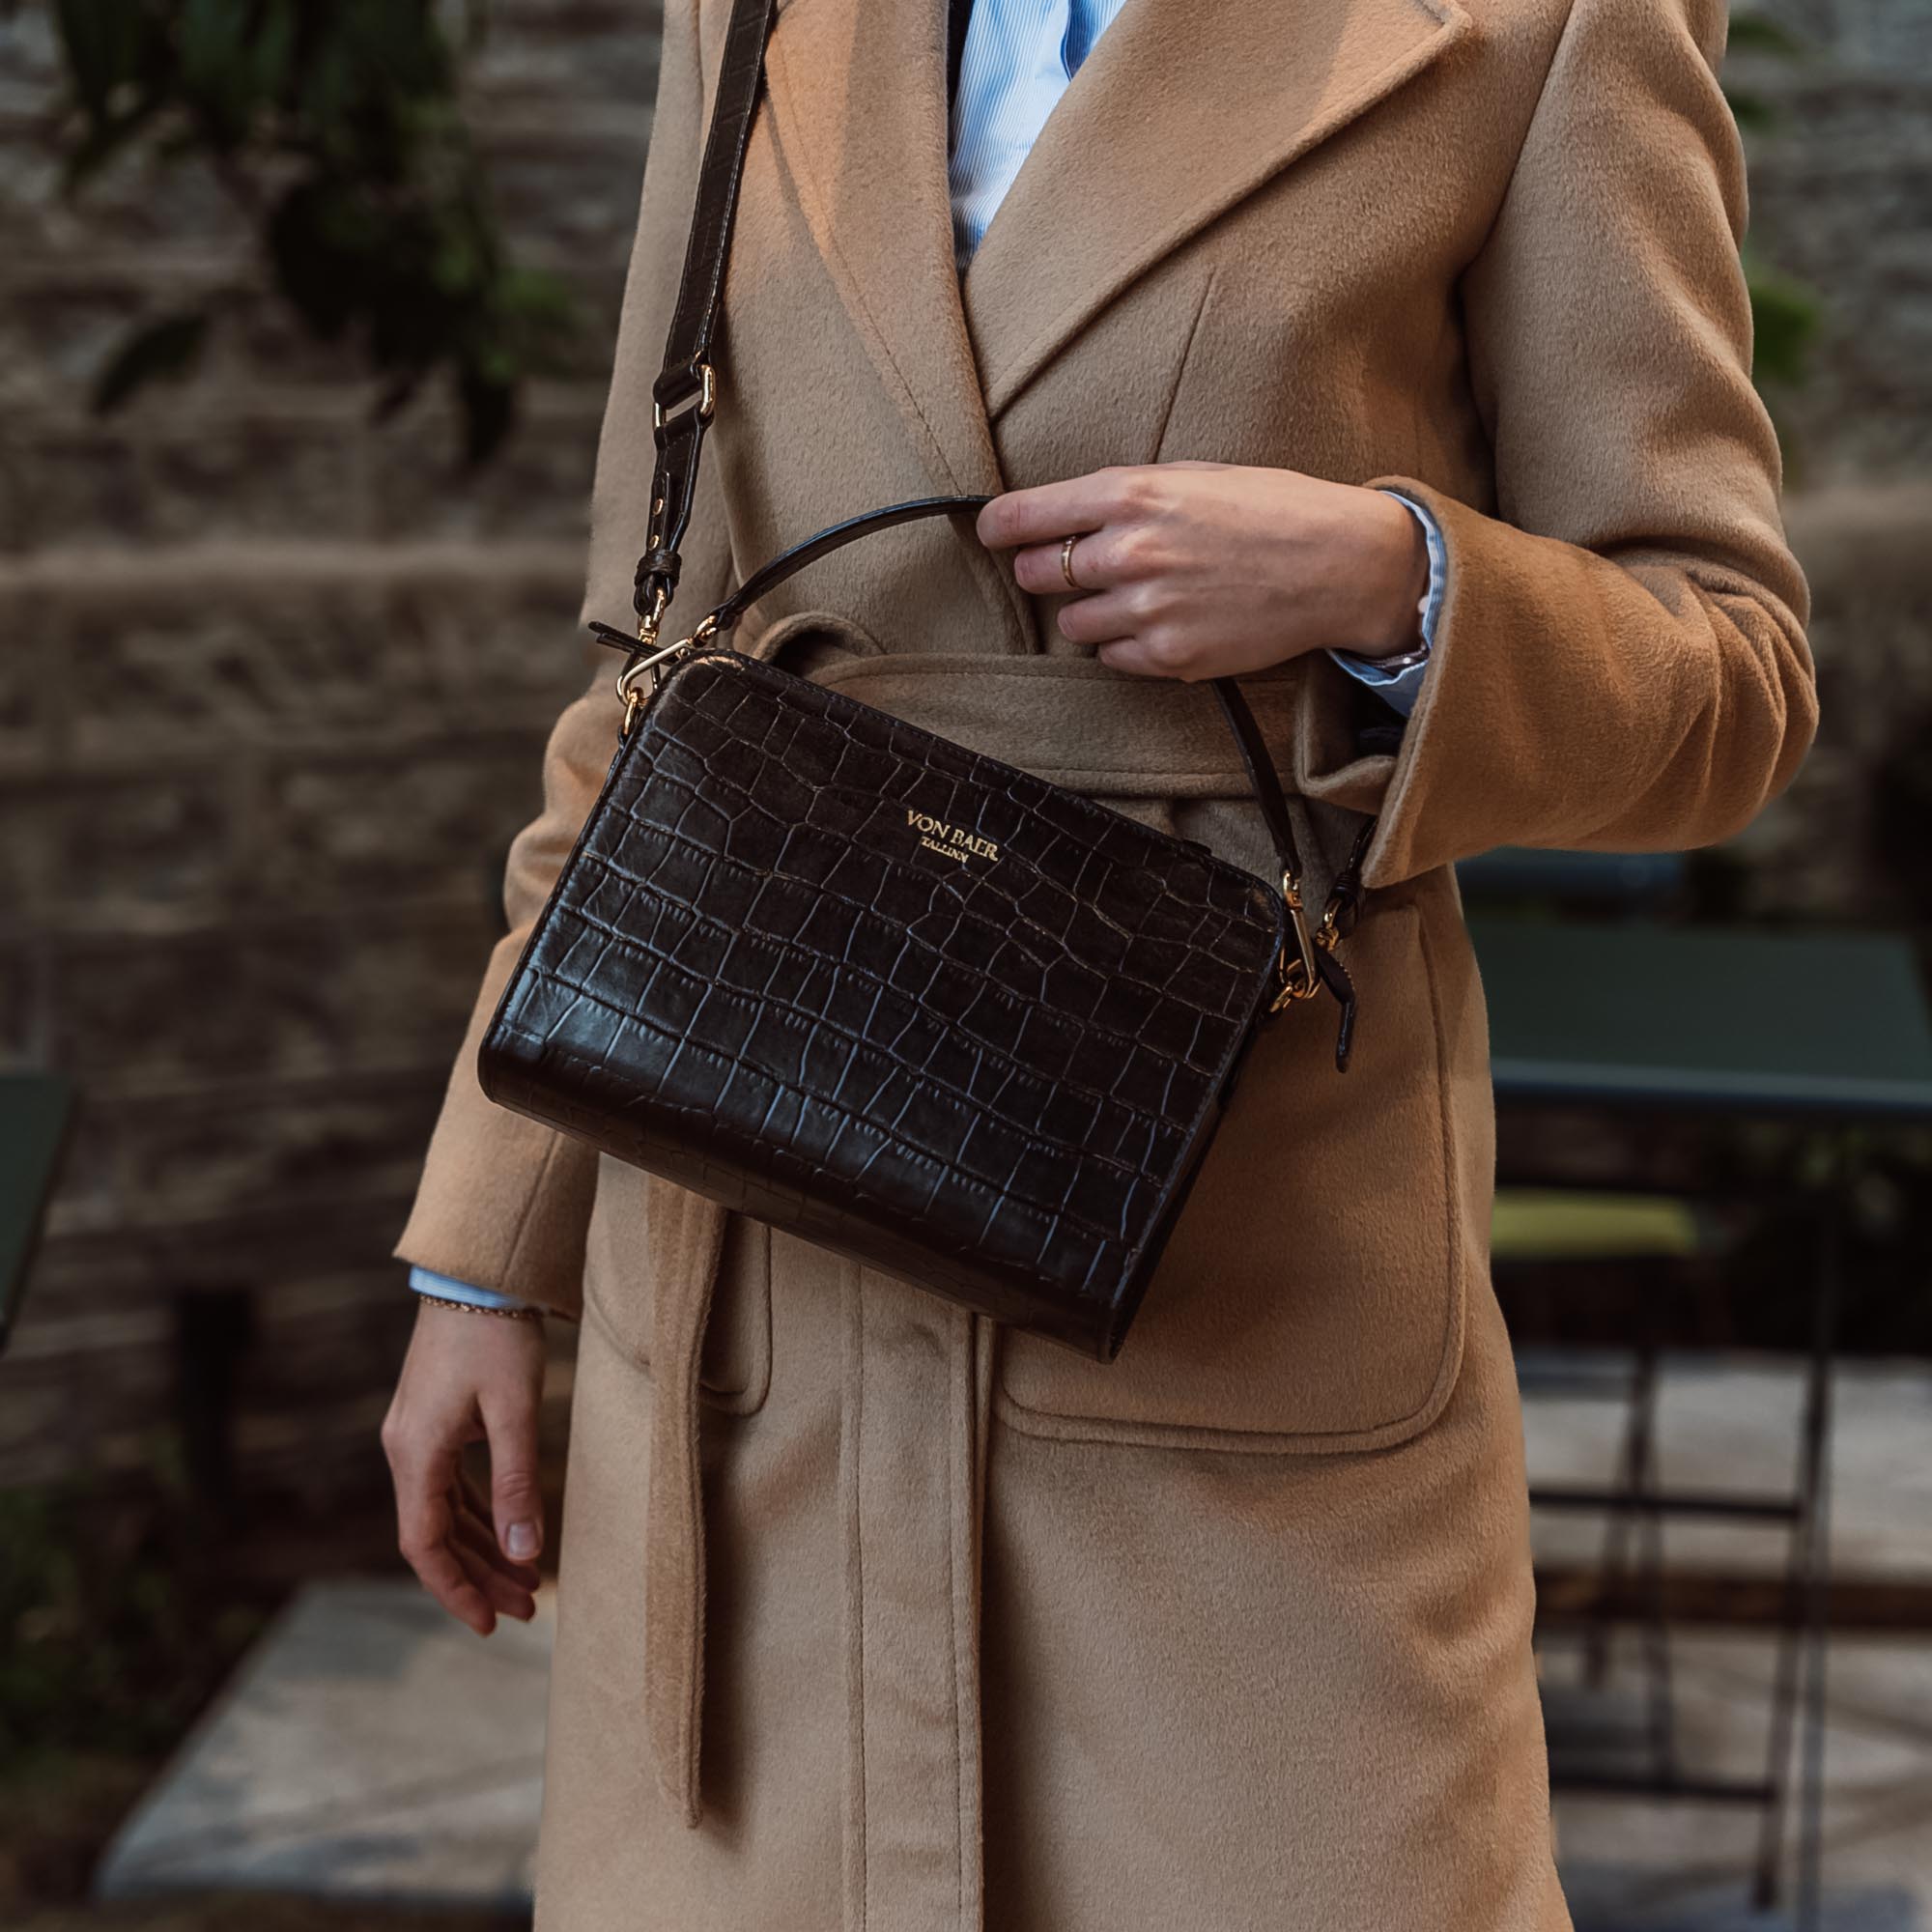 This New Bag Trend Looks Expensive No Matter How Much You Spend | Bags,  Canvas leather bag, Diy clothes bag